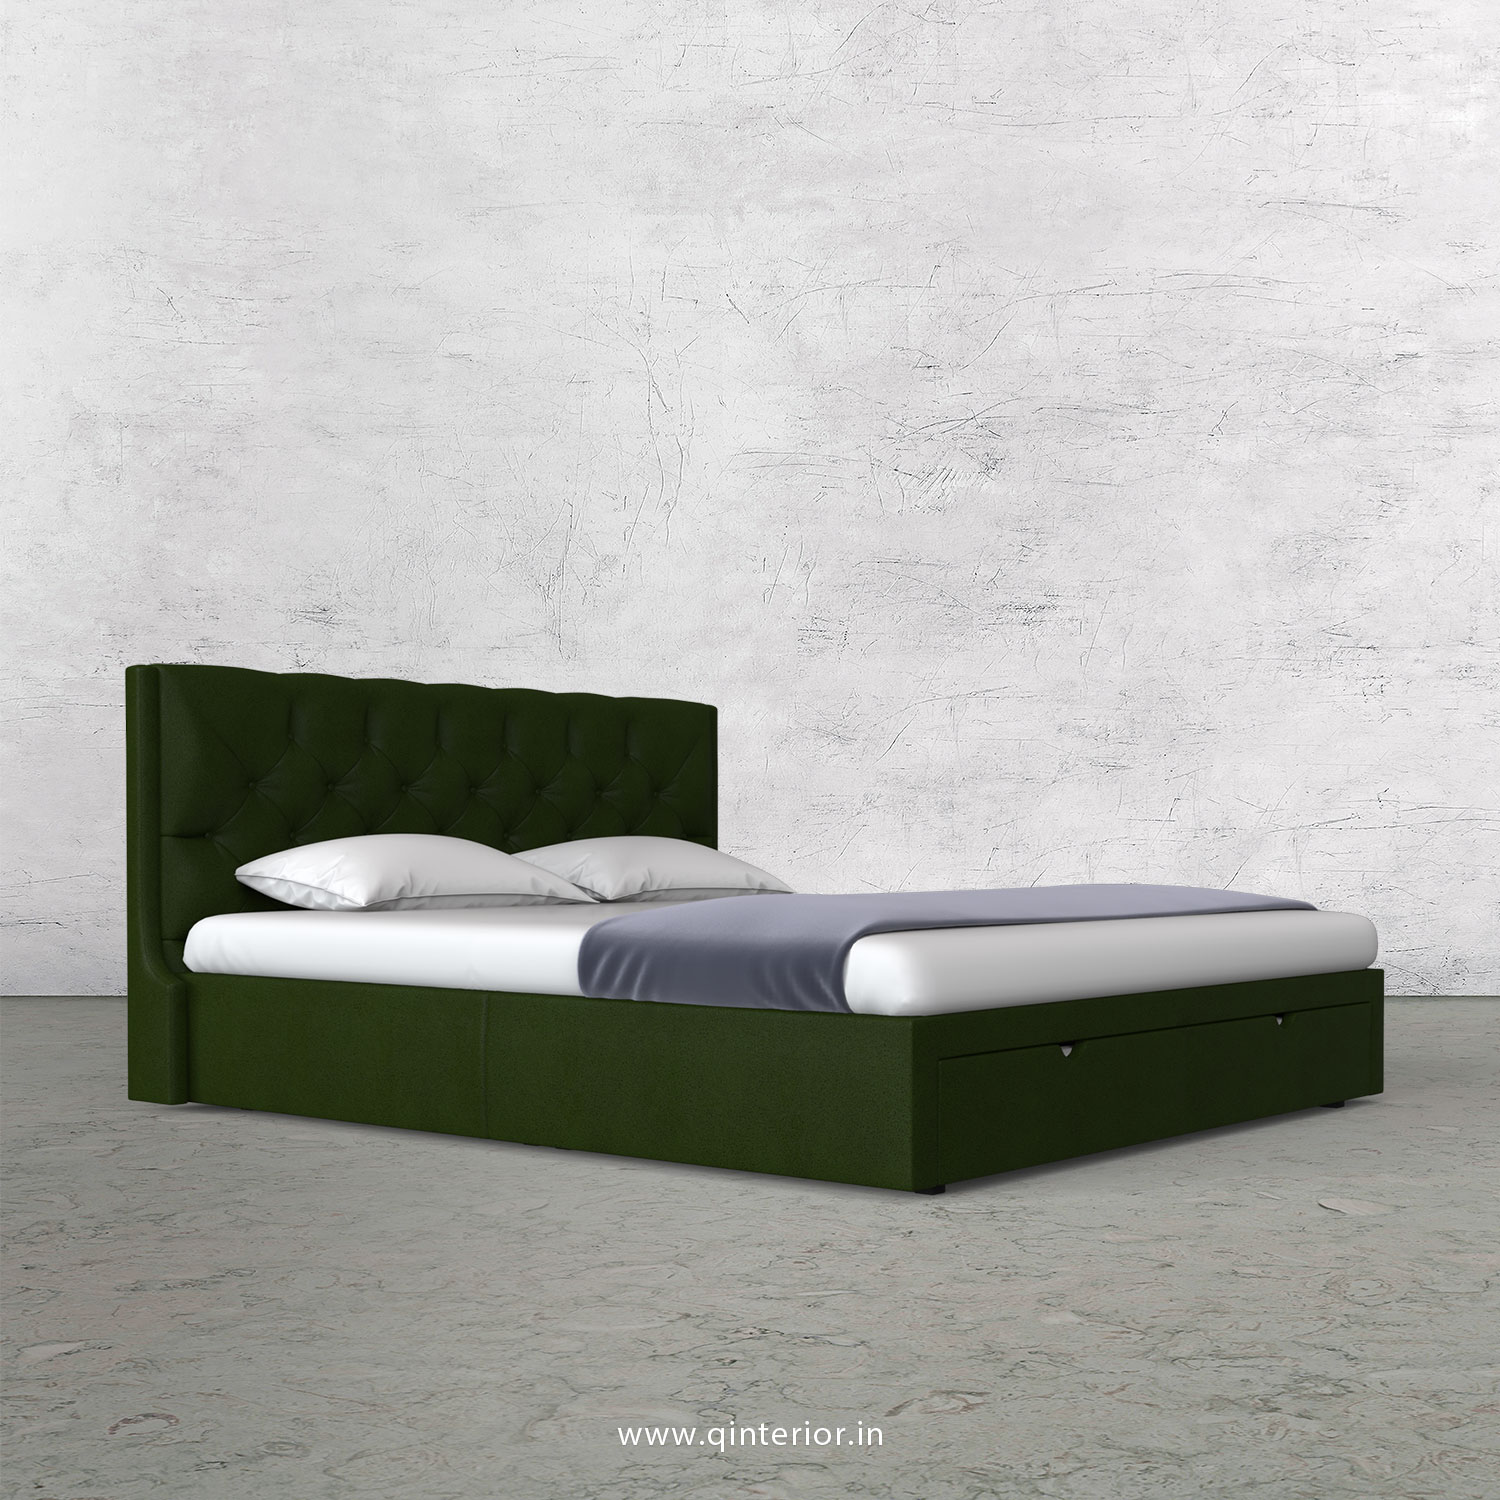 Scorpius Queen Storage Bed in Fab Leather Fabric - QBD001 FL04